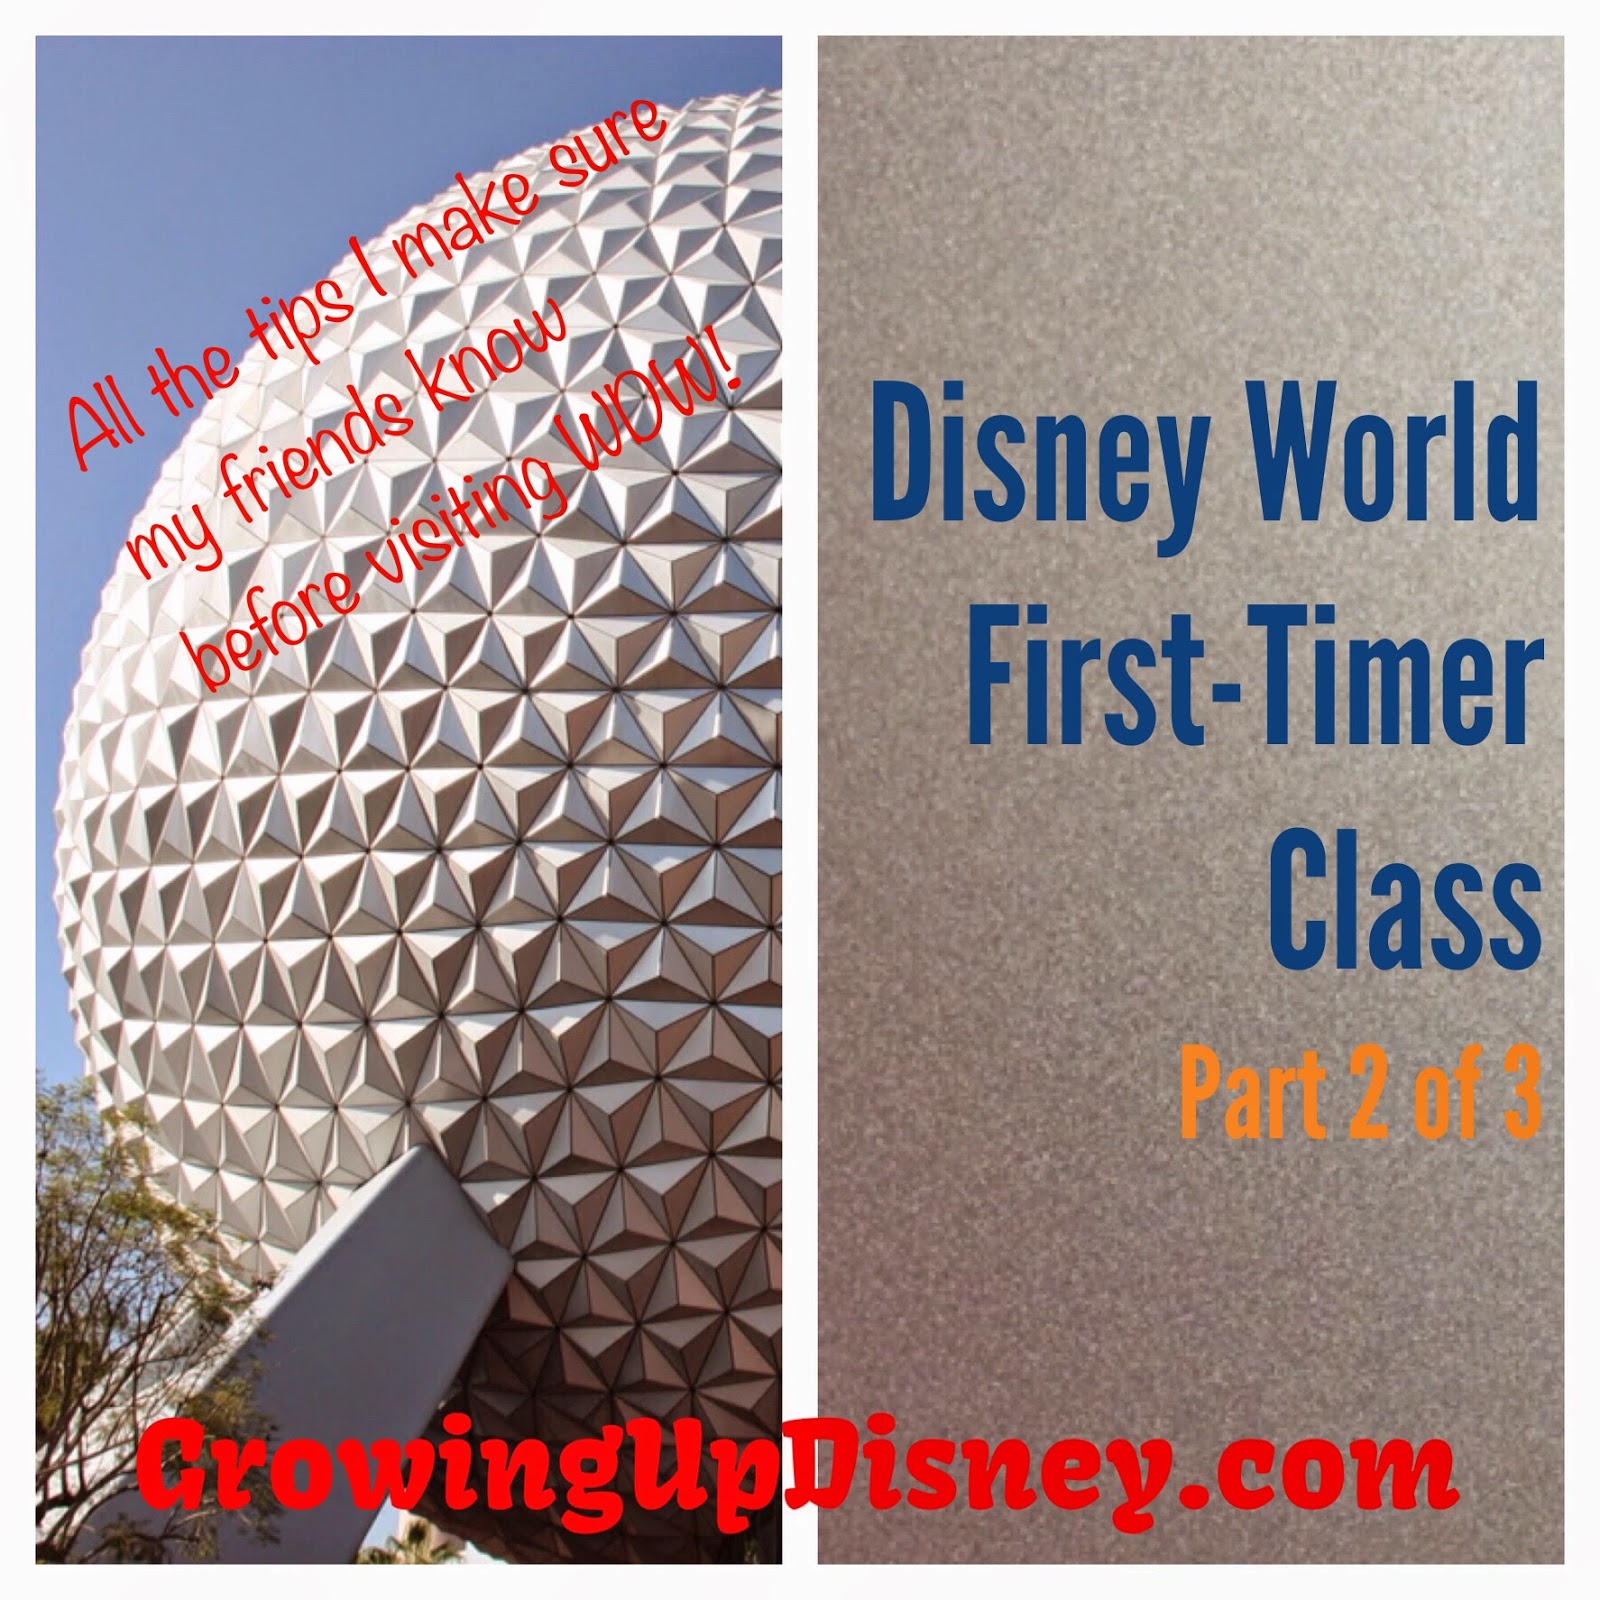 Growing Up Disney: The Disney First-Timer Class I Give to My Friends ...